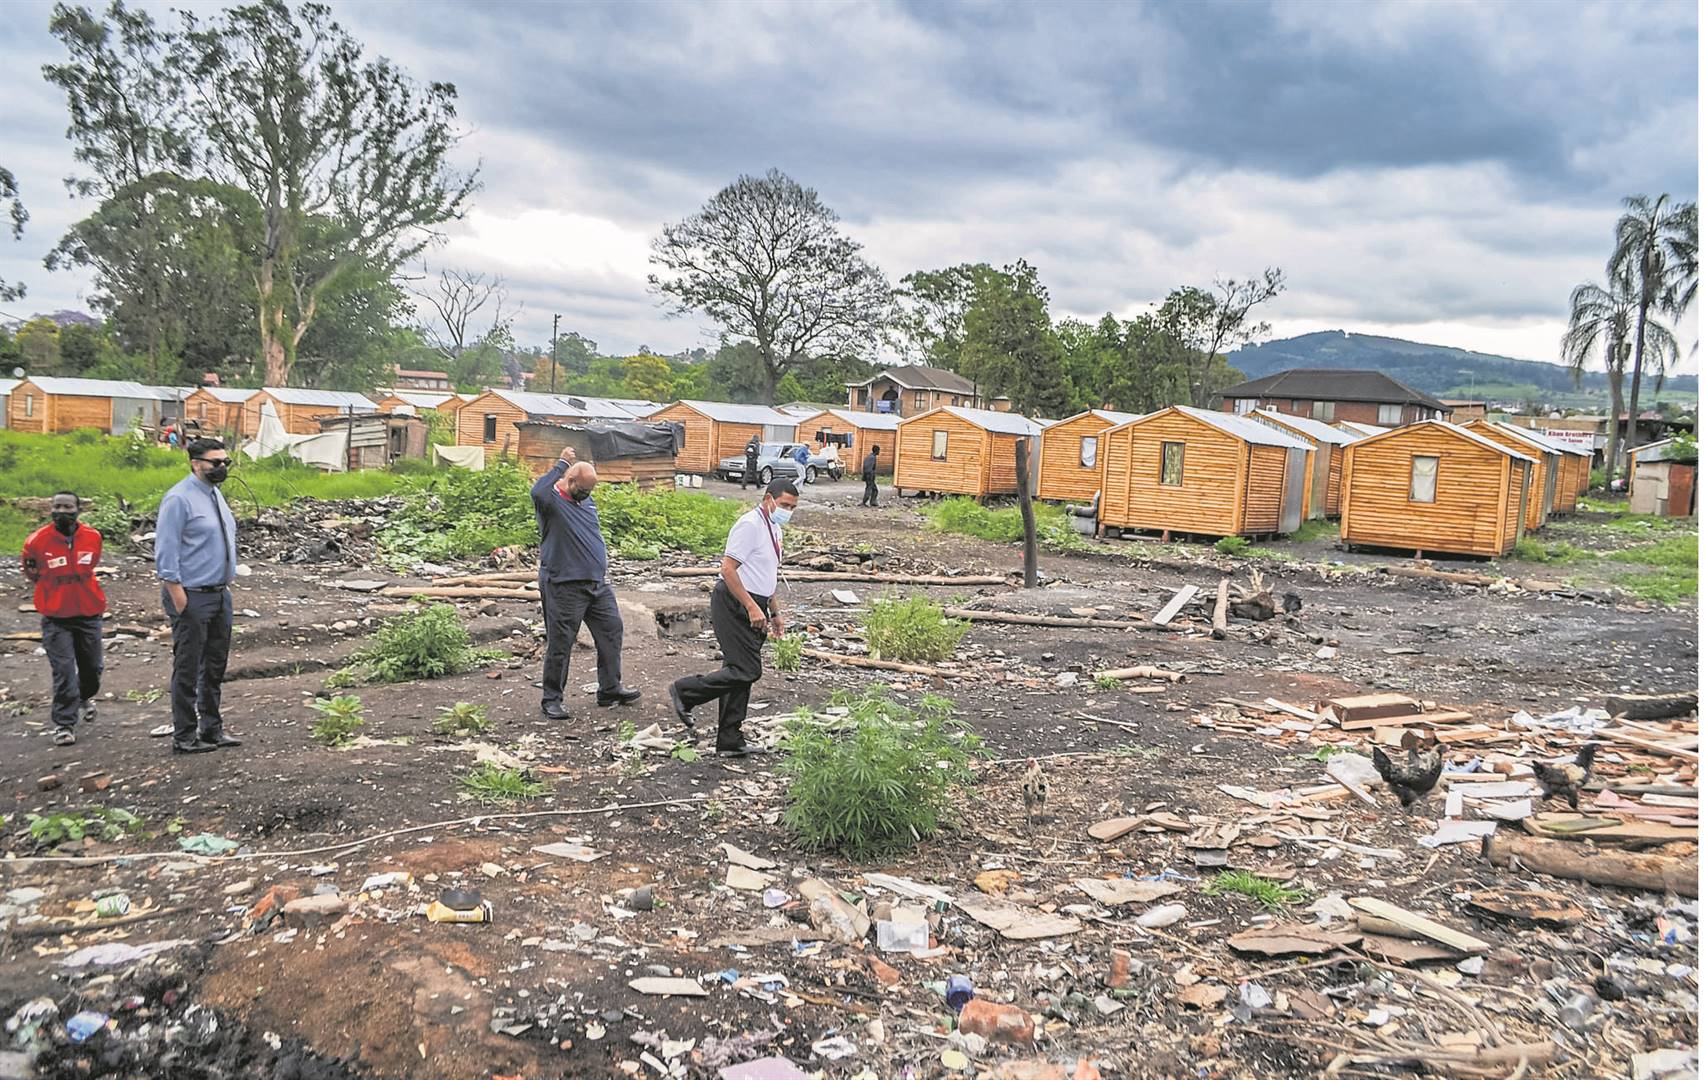 On Friday a team of investigators and commissioners from the South African Human Rights Commission went to the Khan Road informal settlement to conduct an oversight visit.